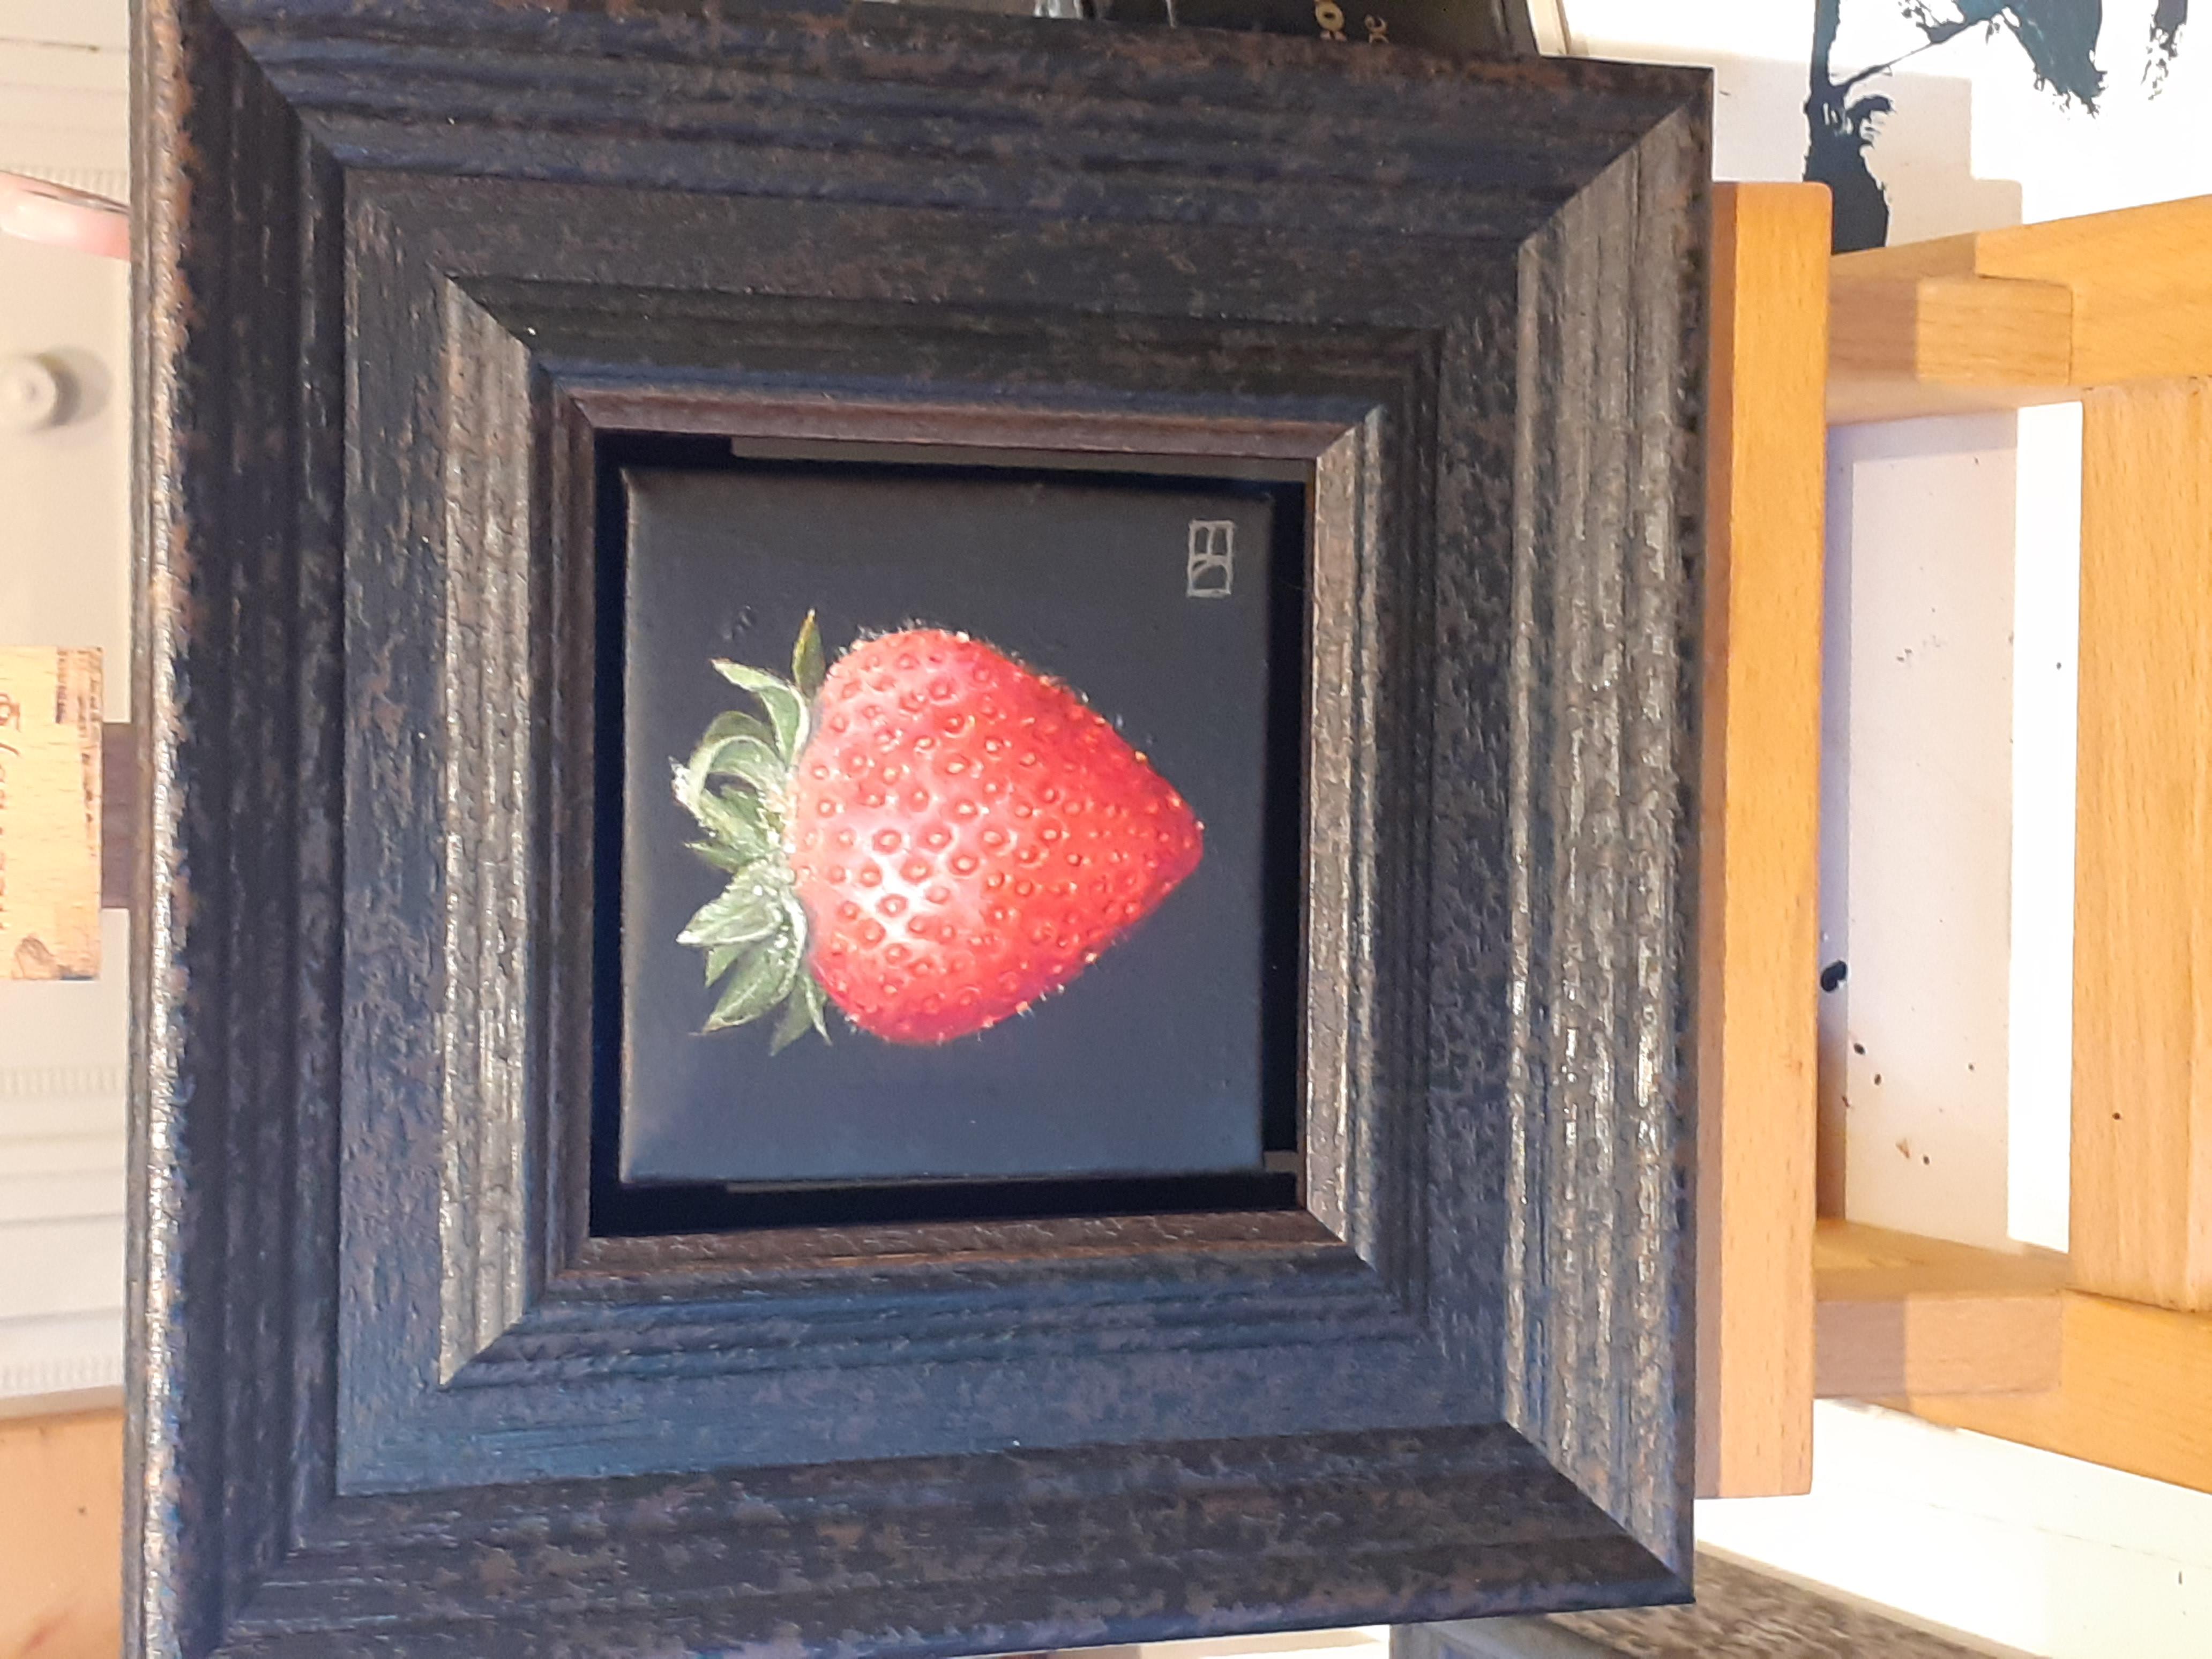 Dani Humberstone
Strawberry
Original oil painting, still life, fruit
Oil paint on canvas
Canvas Size: H 10cm x W 10cm x D 1cm
Framed Size: H 21cm x W 21cm x D 4cm
Sold Framed (Dark textured wood frame)
Free Shipping
Please note that insitu images